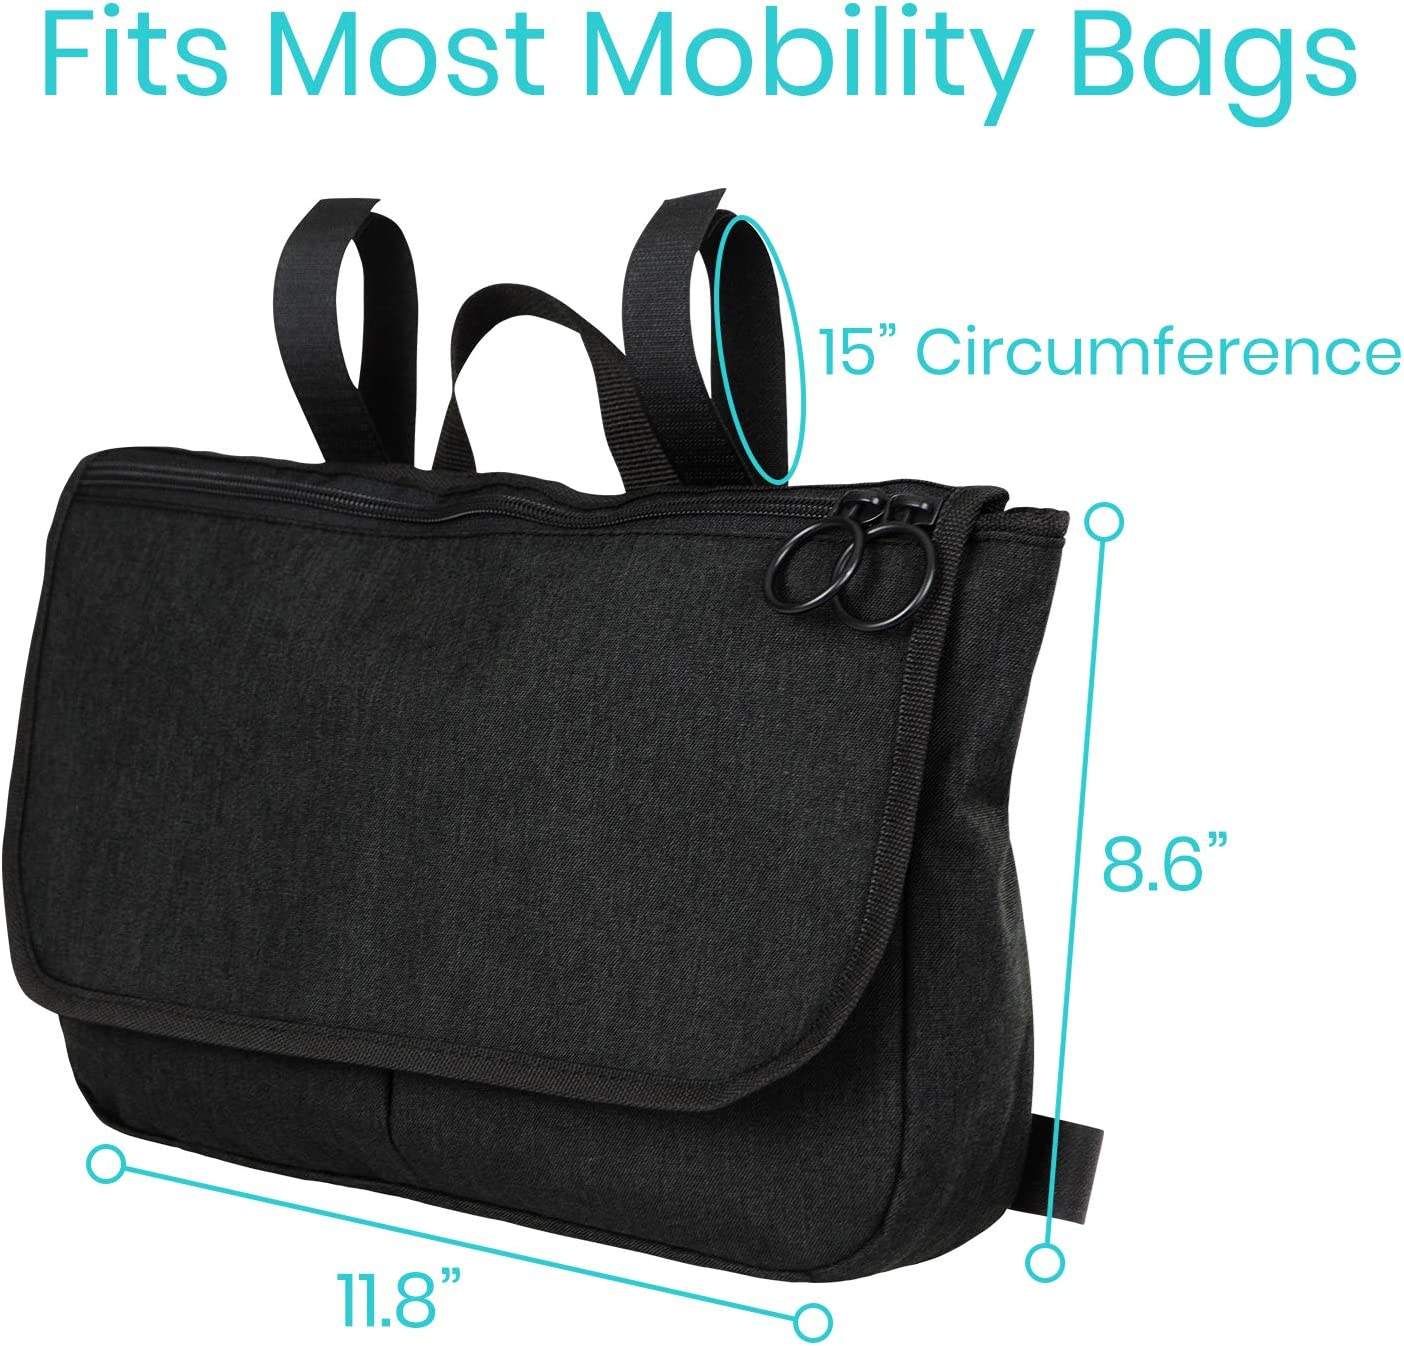 Wheelchair Carry Bag Arm Rest Pouch For Rollator Walkers Power Wheel Chairs And Knee Scooters Side Storage Organizer